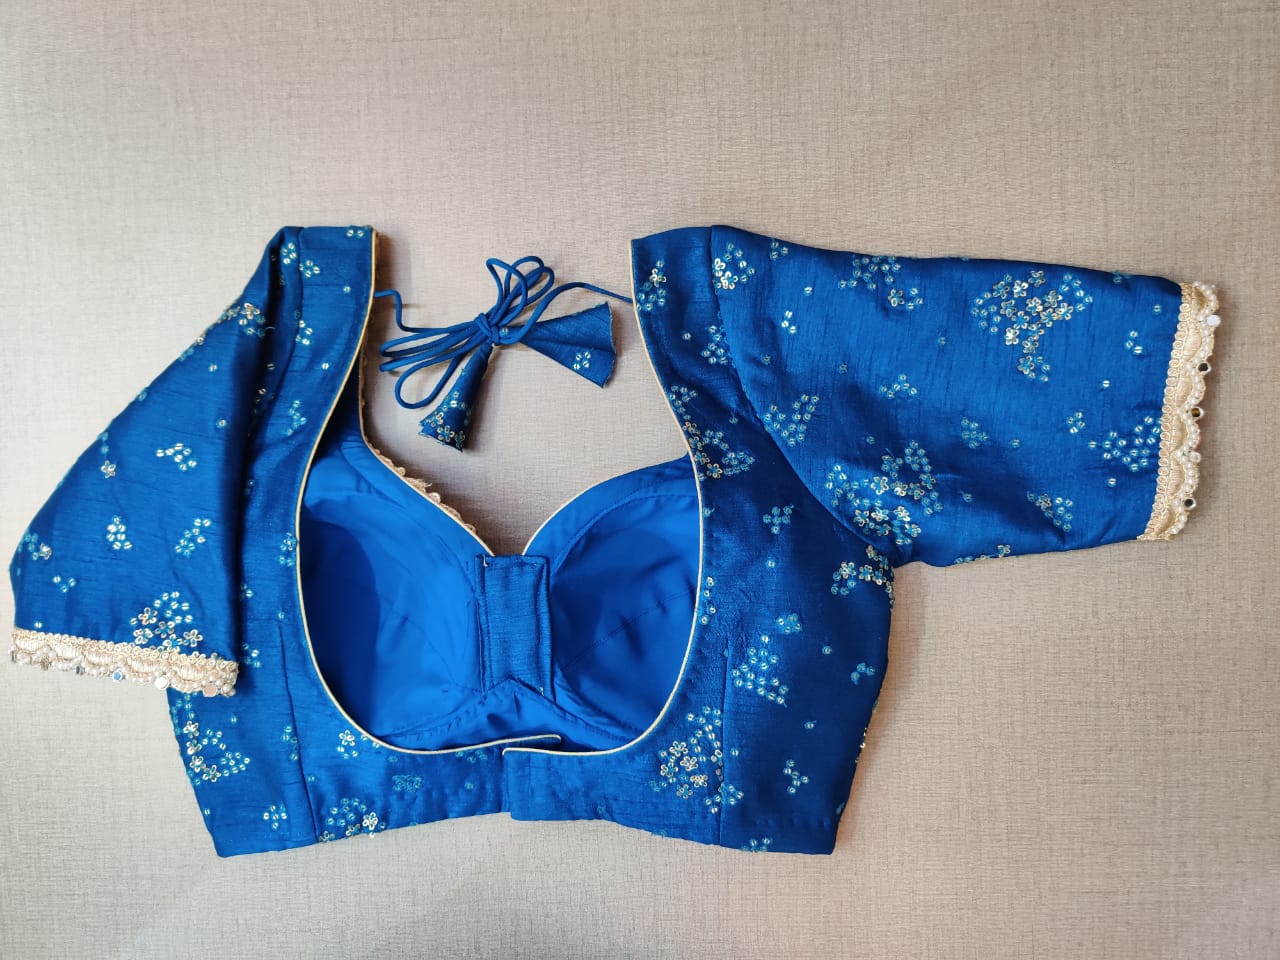 Buy stunning royal blue embroidered designer saree blouse online in USA. Elevate your Indian ethnic saree looks with beautiful readymade sari blouse, embroidered saree blouses, Banarasi saree blouse, designer saree blouses, sleeveless saree blouses from Pure Elegance Indian fashion store in USA.-back